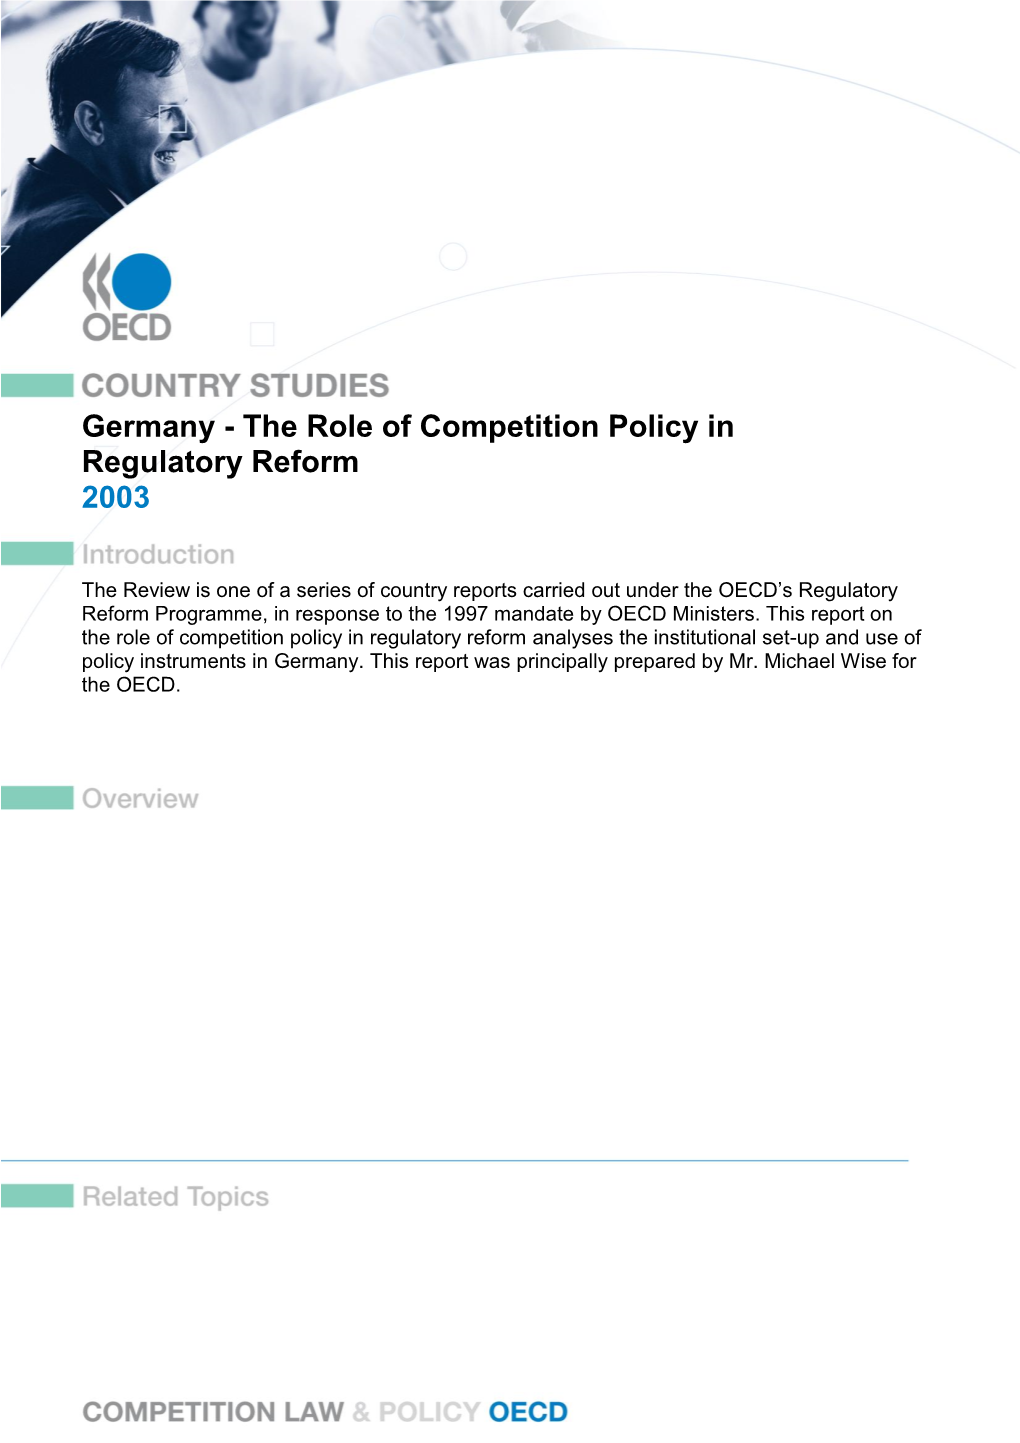 Germany - the Role of Competition Policy in Regulatory Reform 2003